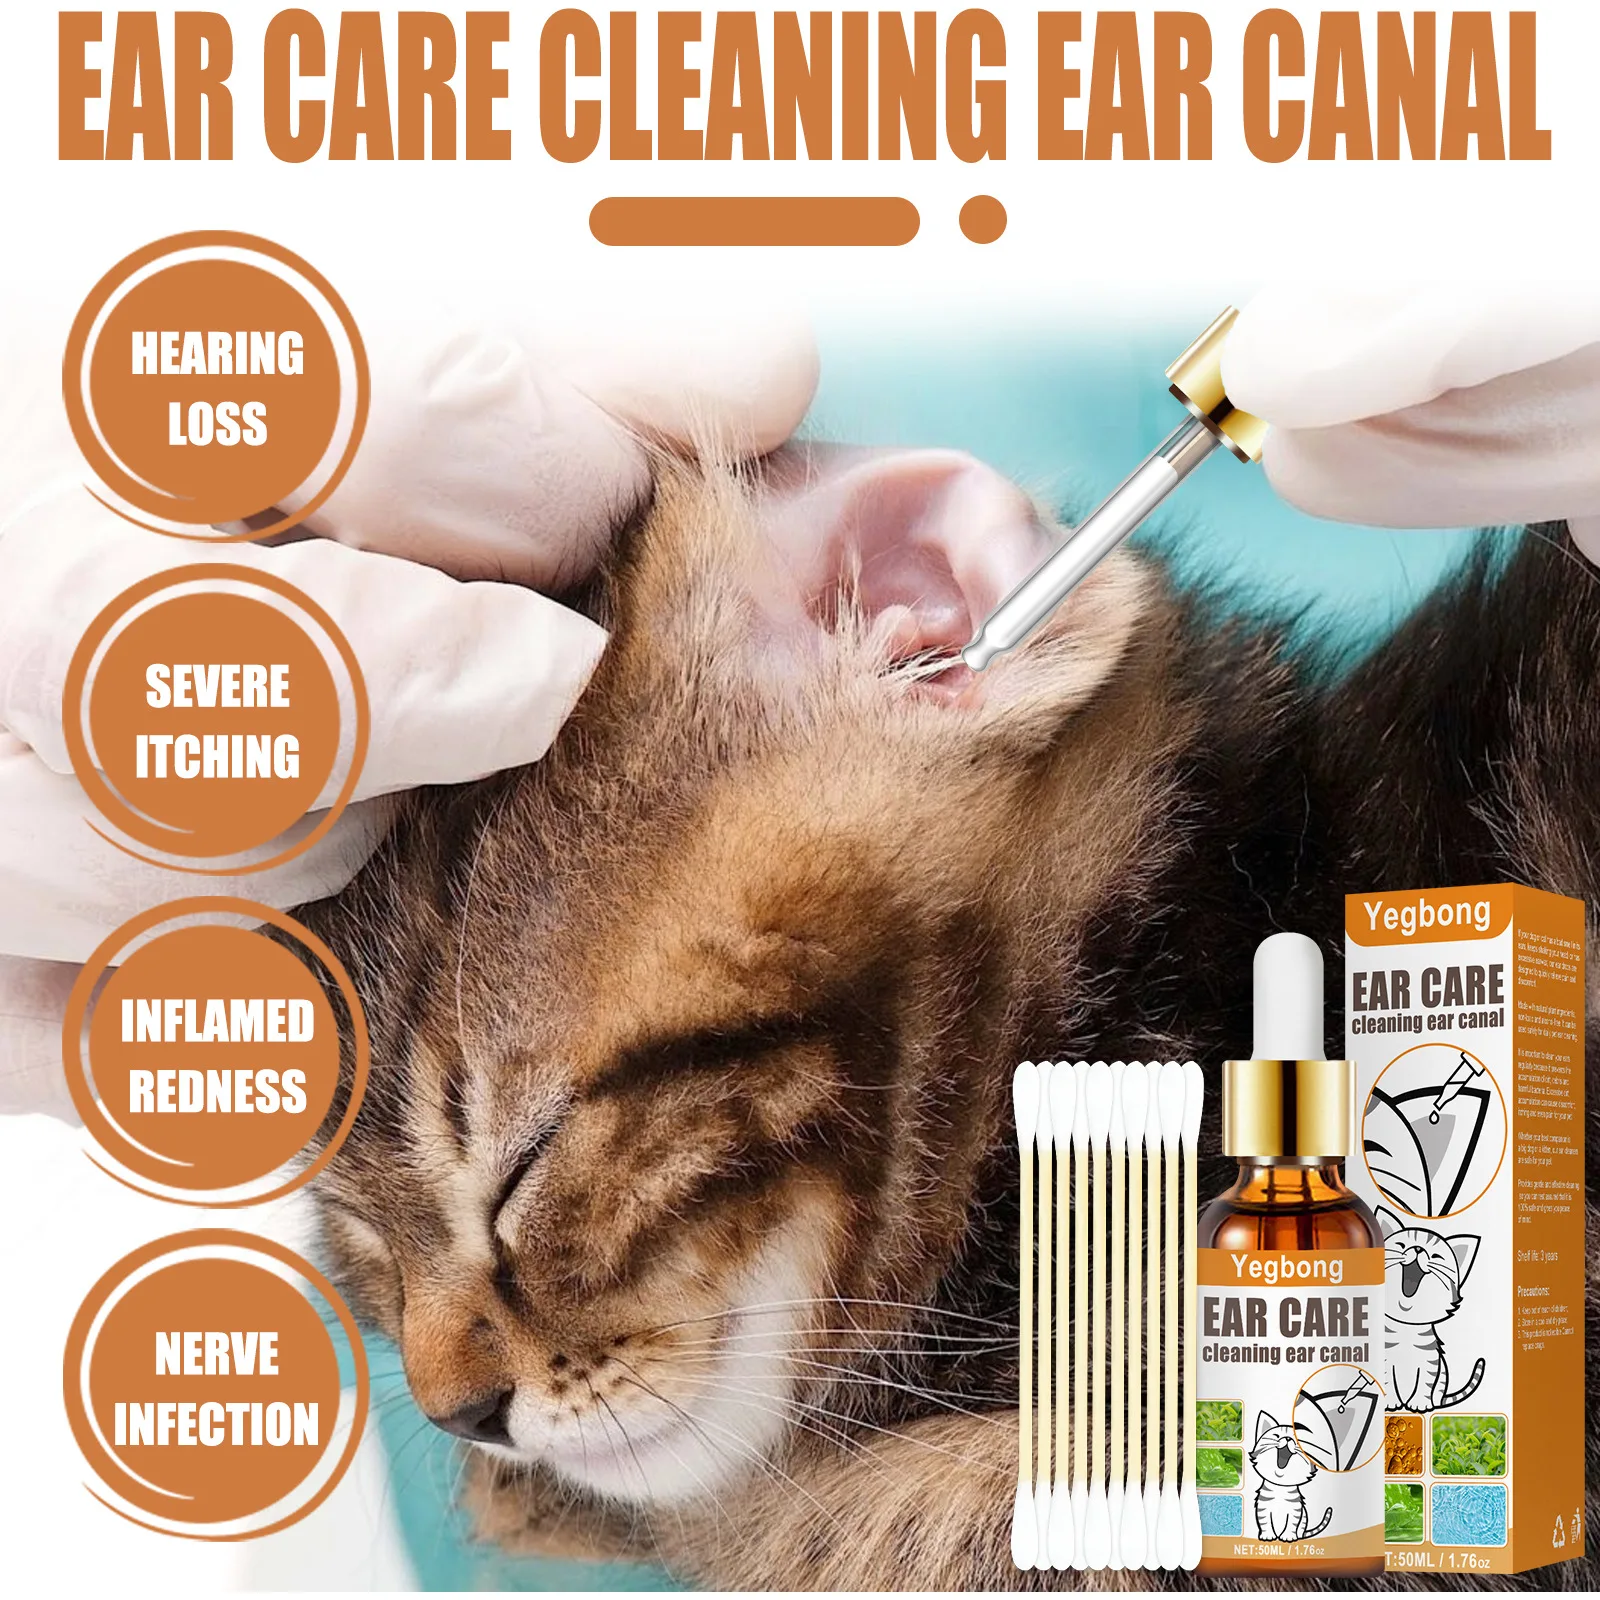 

Pet Ear Cleaner Pet Ear Excess Hair Removing Powder Ear Care Cat Dog Health Anti-ticks Cleaning Supplies Anti-mite Pet Products